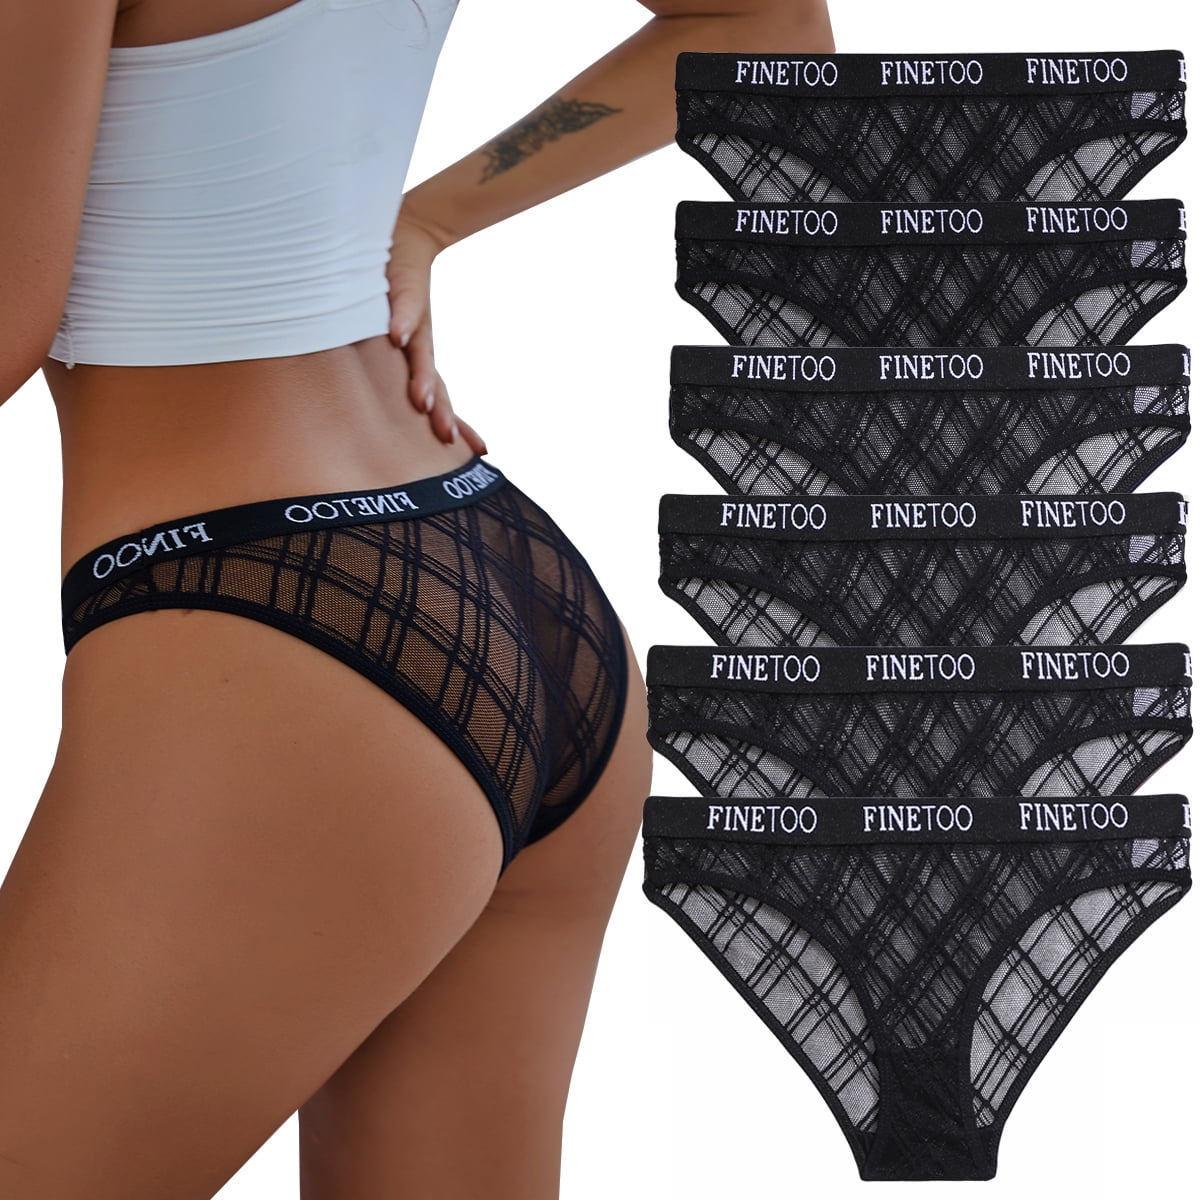 FINETOO 6 Pack Womens Underwear Invisible Seamless Bikini Lace Plaid Briefs  Half Back Coverage Panties S-XL 